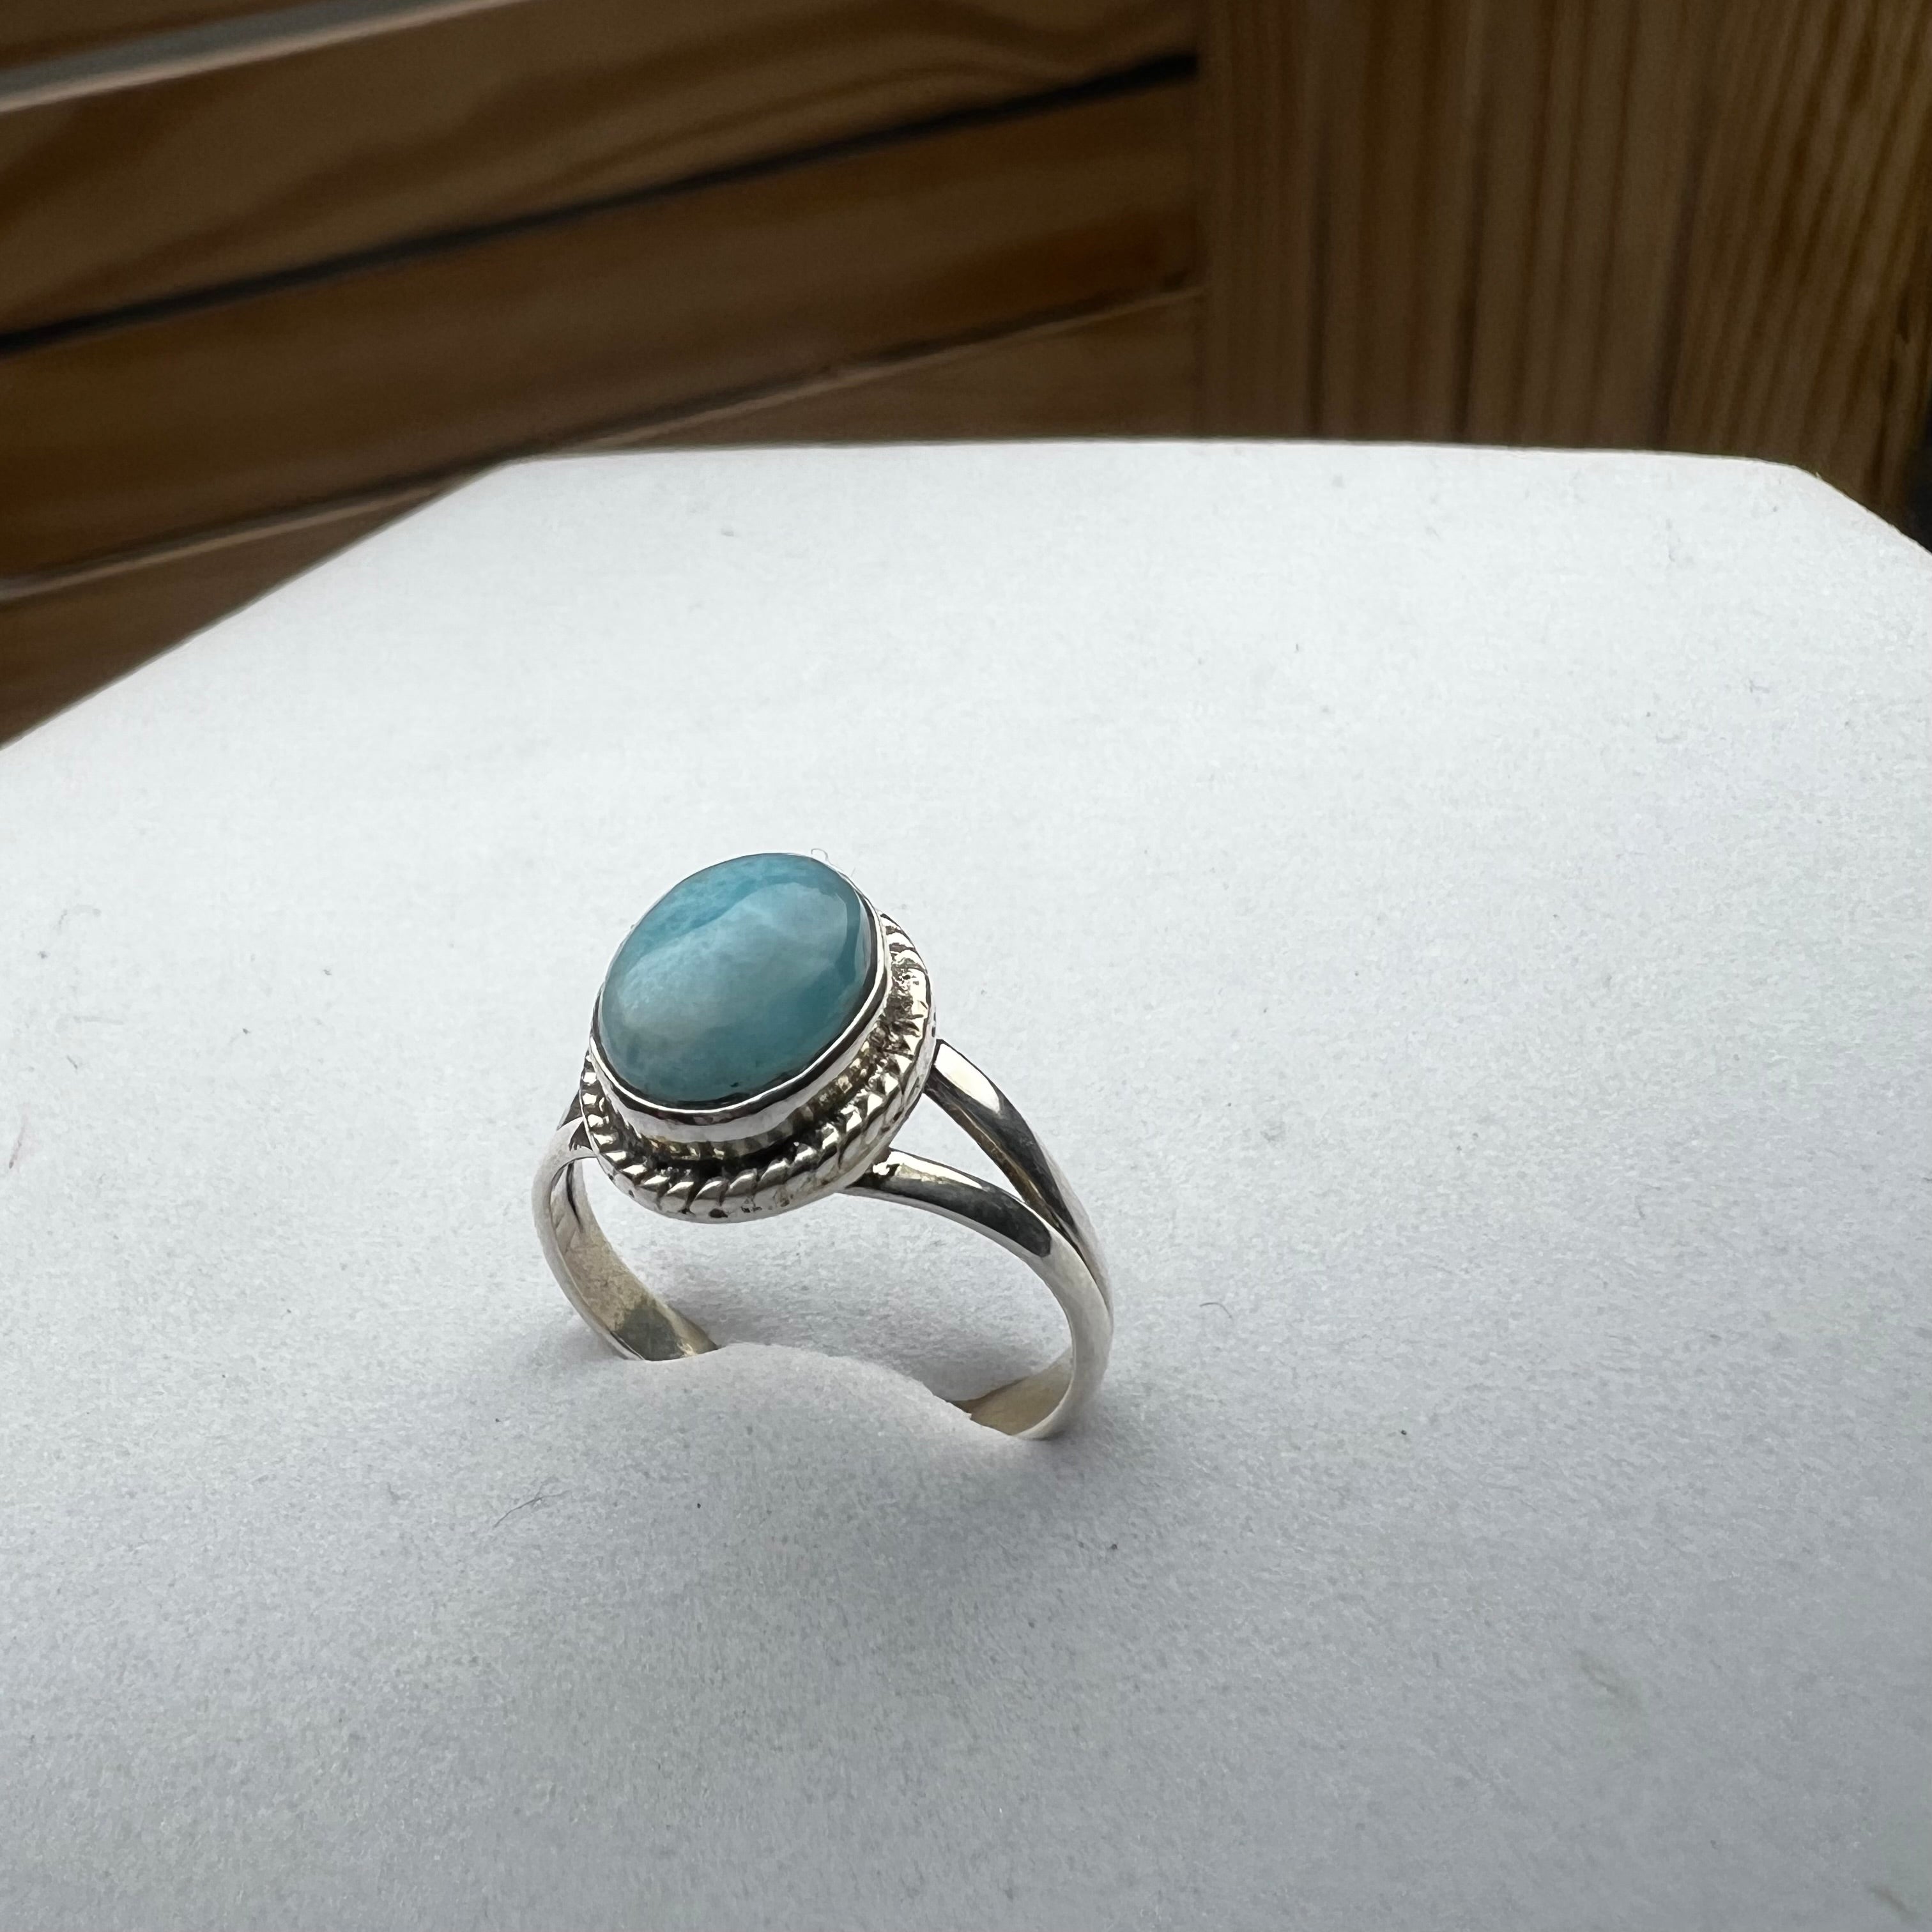 HANDCRAFTED LARIMAR RING IN
SILVER 925 (SIZE 6)